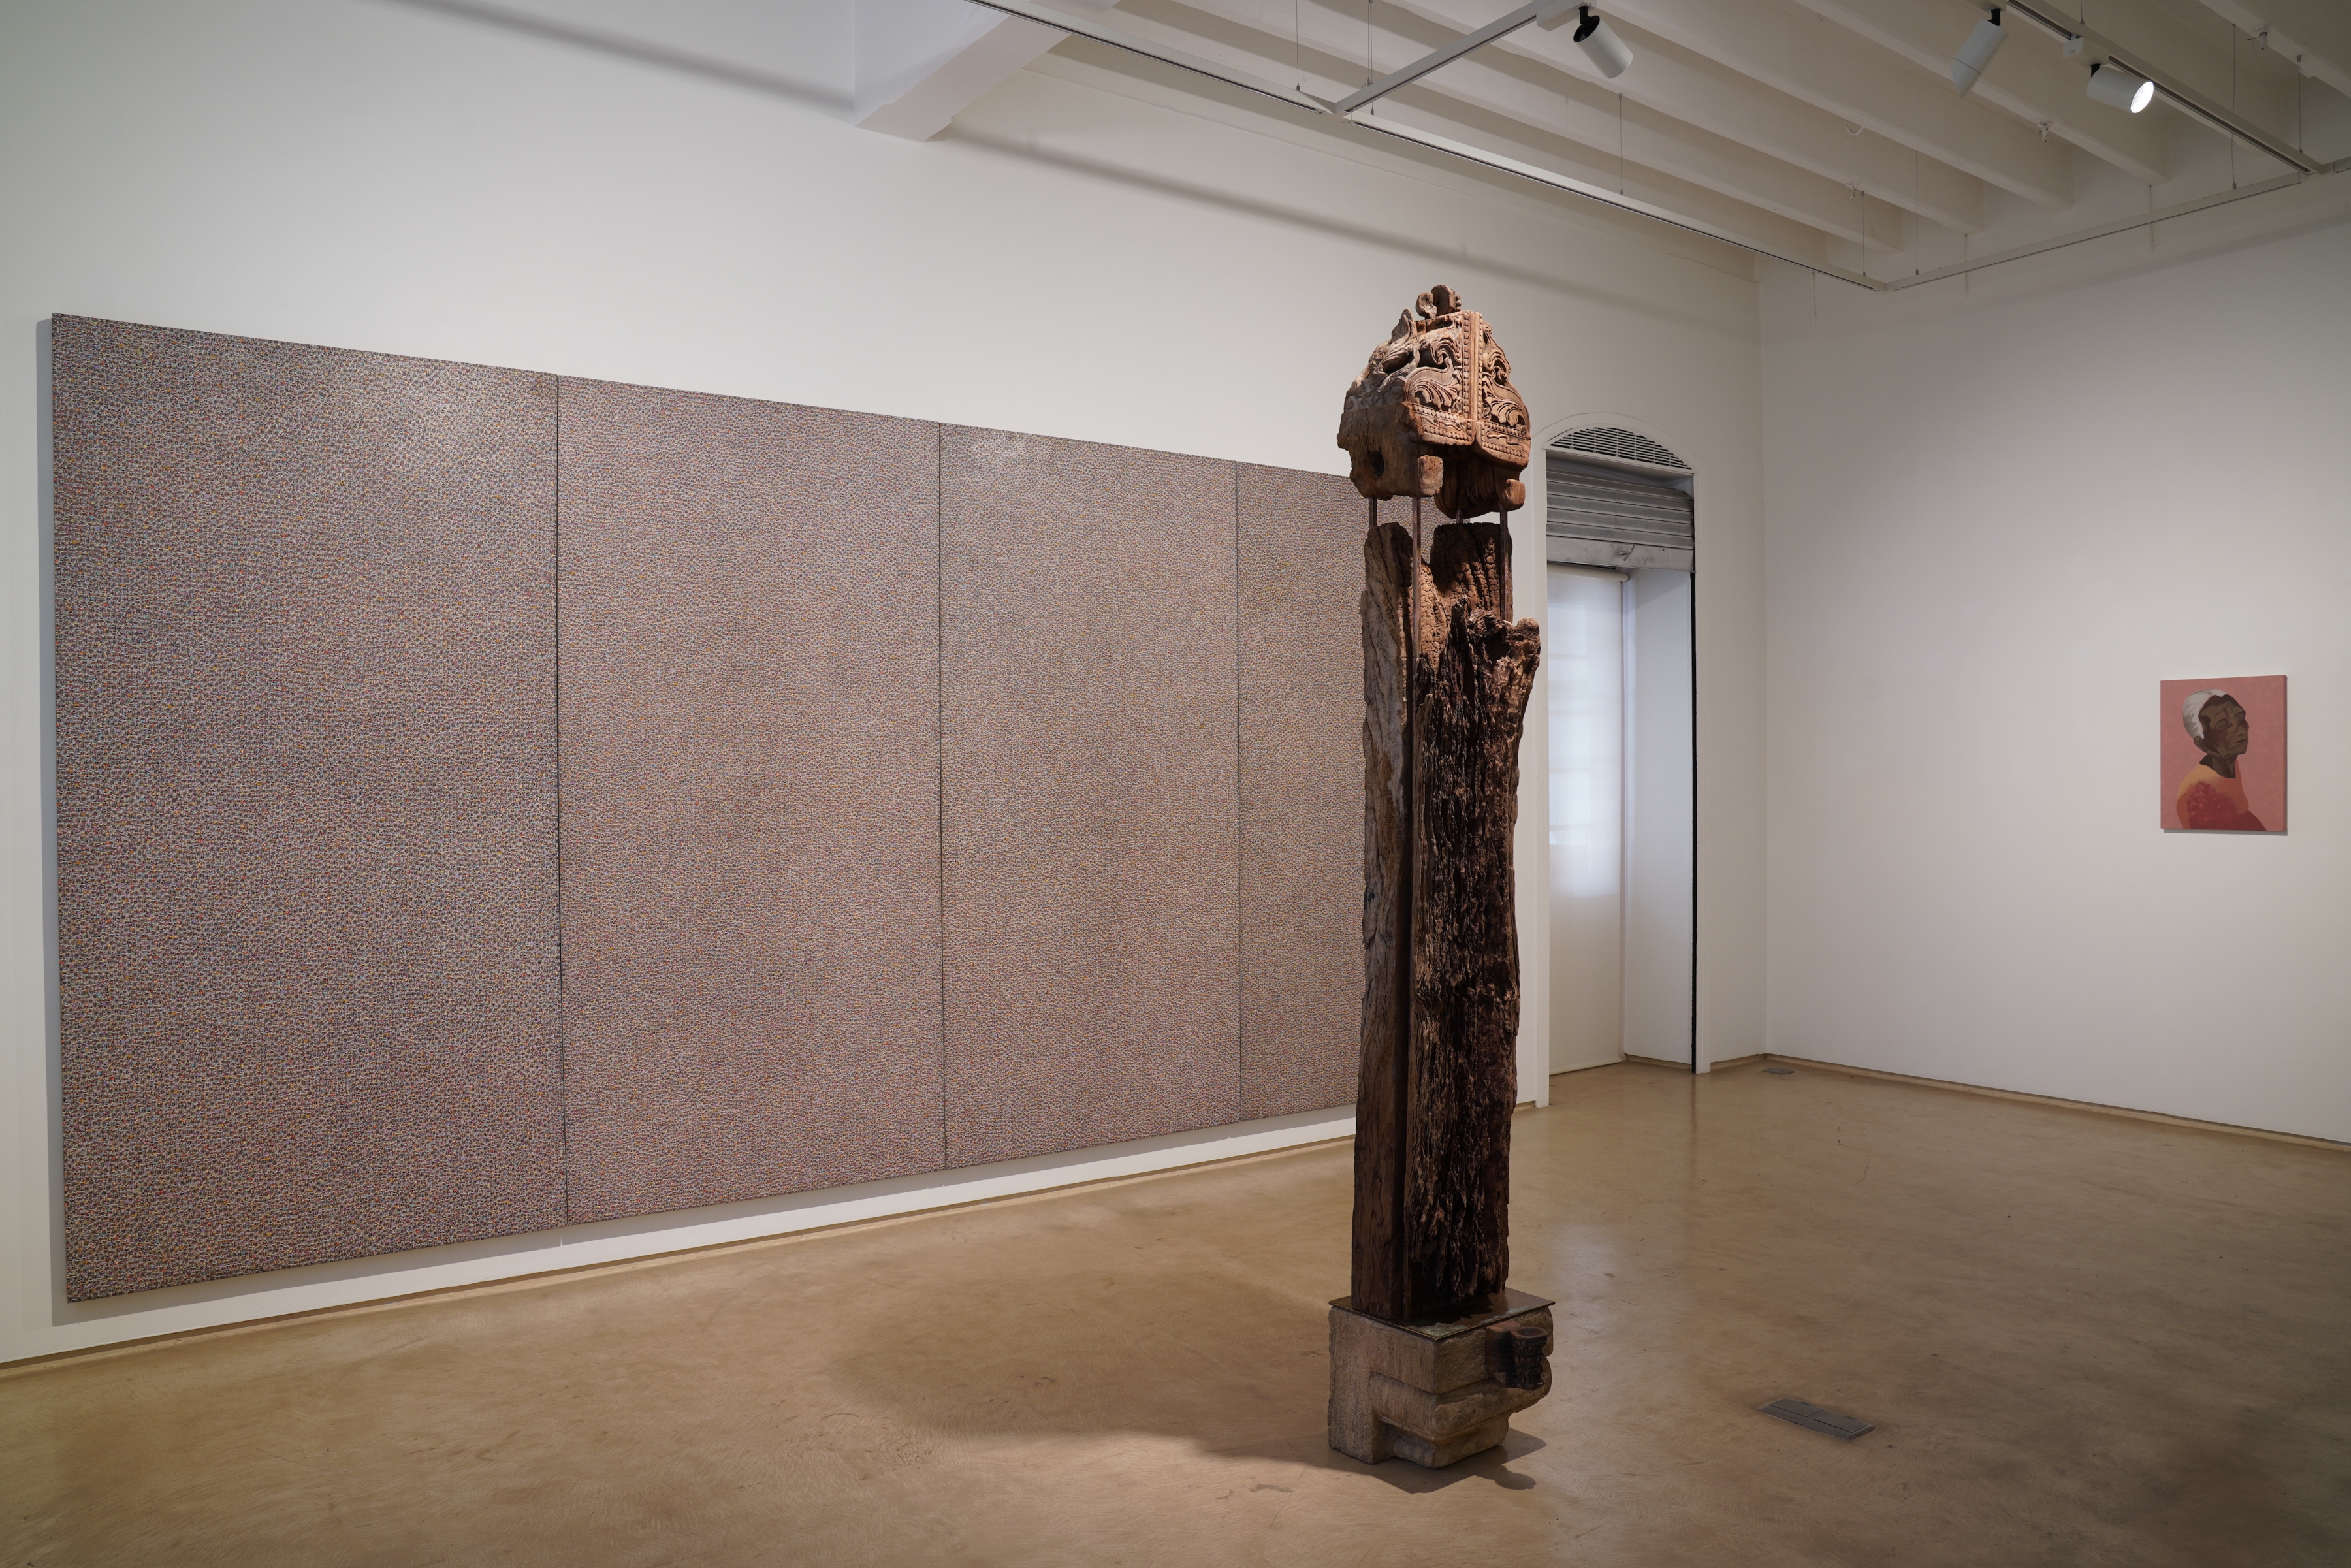 ARUN K.S.,&amp;nbsp;Untitled, 2020

Sculpture: Found wood, Sandstone and Brass, 108 x 18 x 12 in / 274.3 x 45.7 x 30.4 cm

Painting: Natural pigments, watercolour and ink on raw canvas primed with rice paper and Bible pulp, 96 x 192 in / 243.8 x 487.6 cm&amp;nbsp;